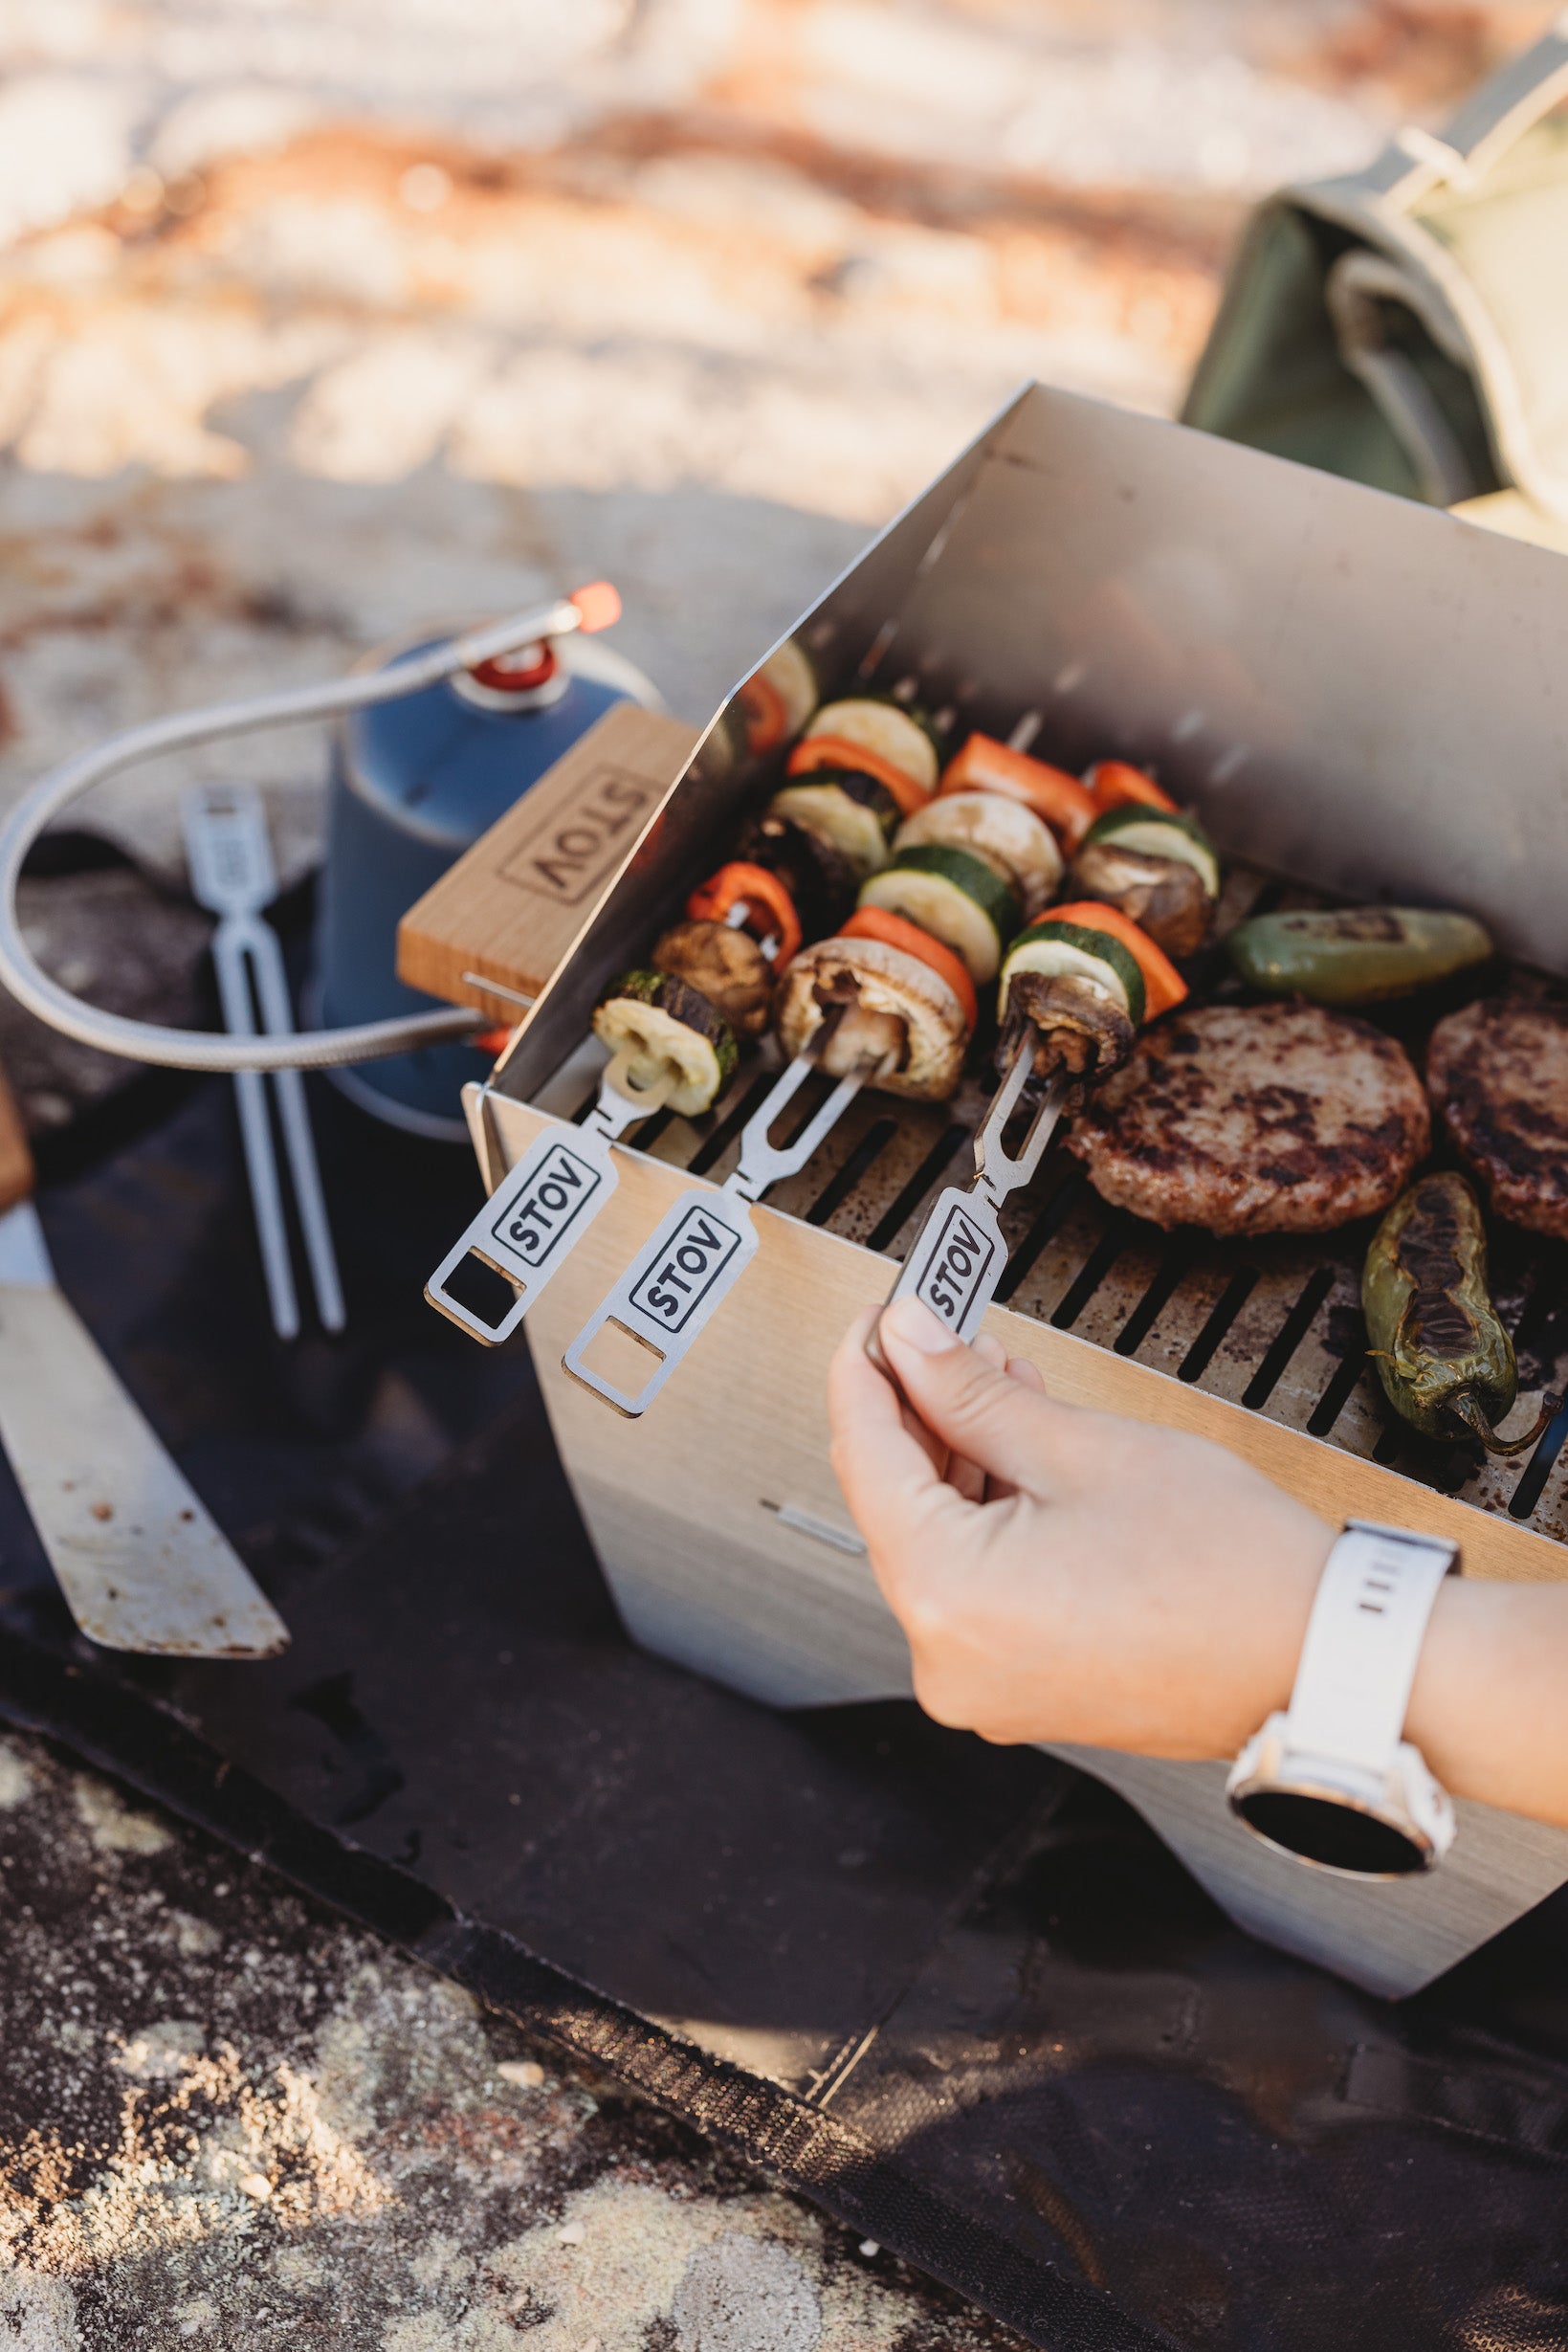 Veggies and chicken skewers are an amazing addition to your portable gas BBQ and will help you grill delicious kebabs.